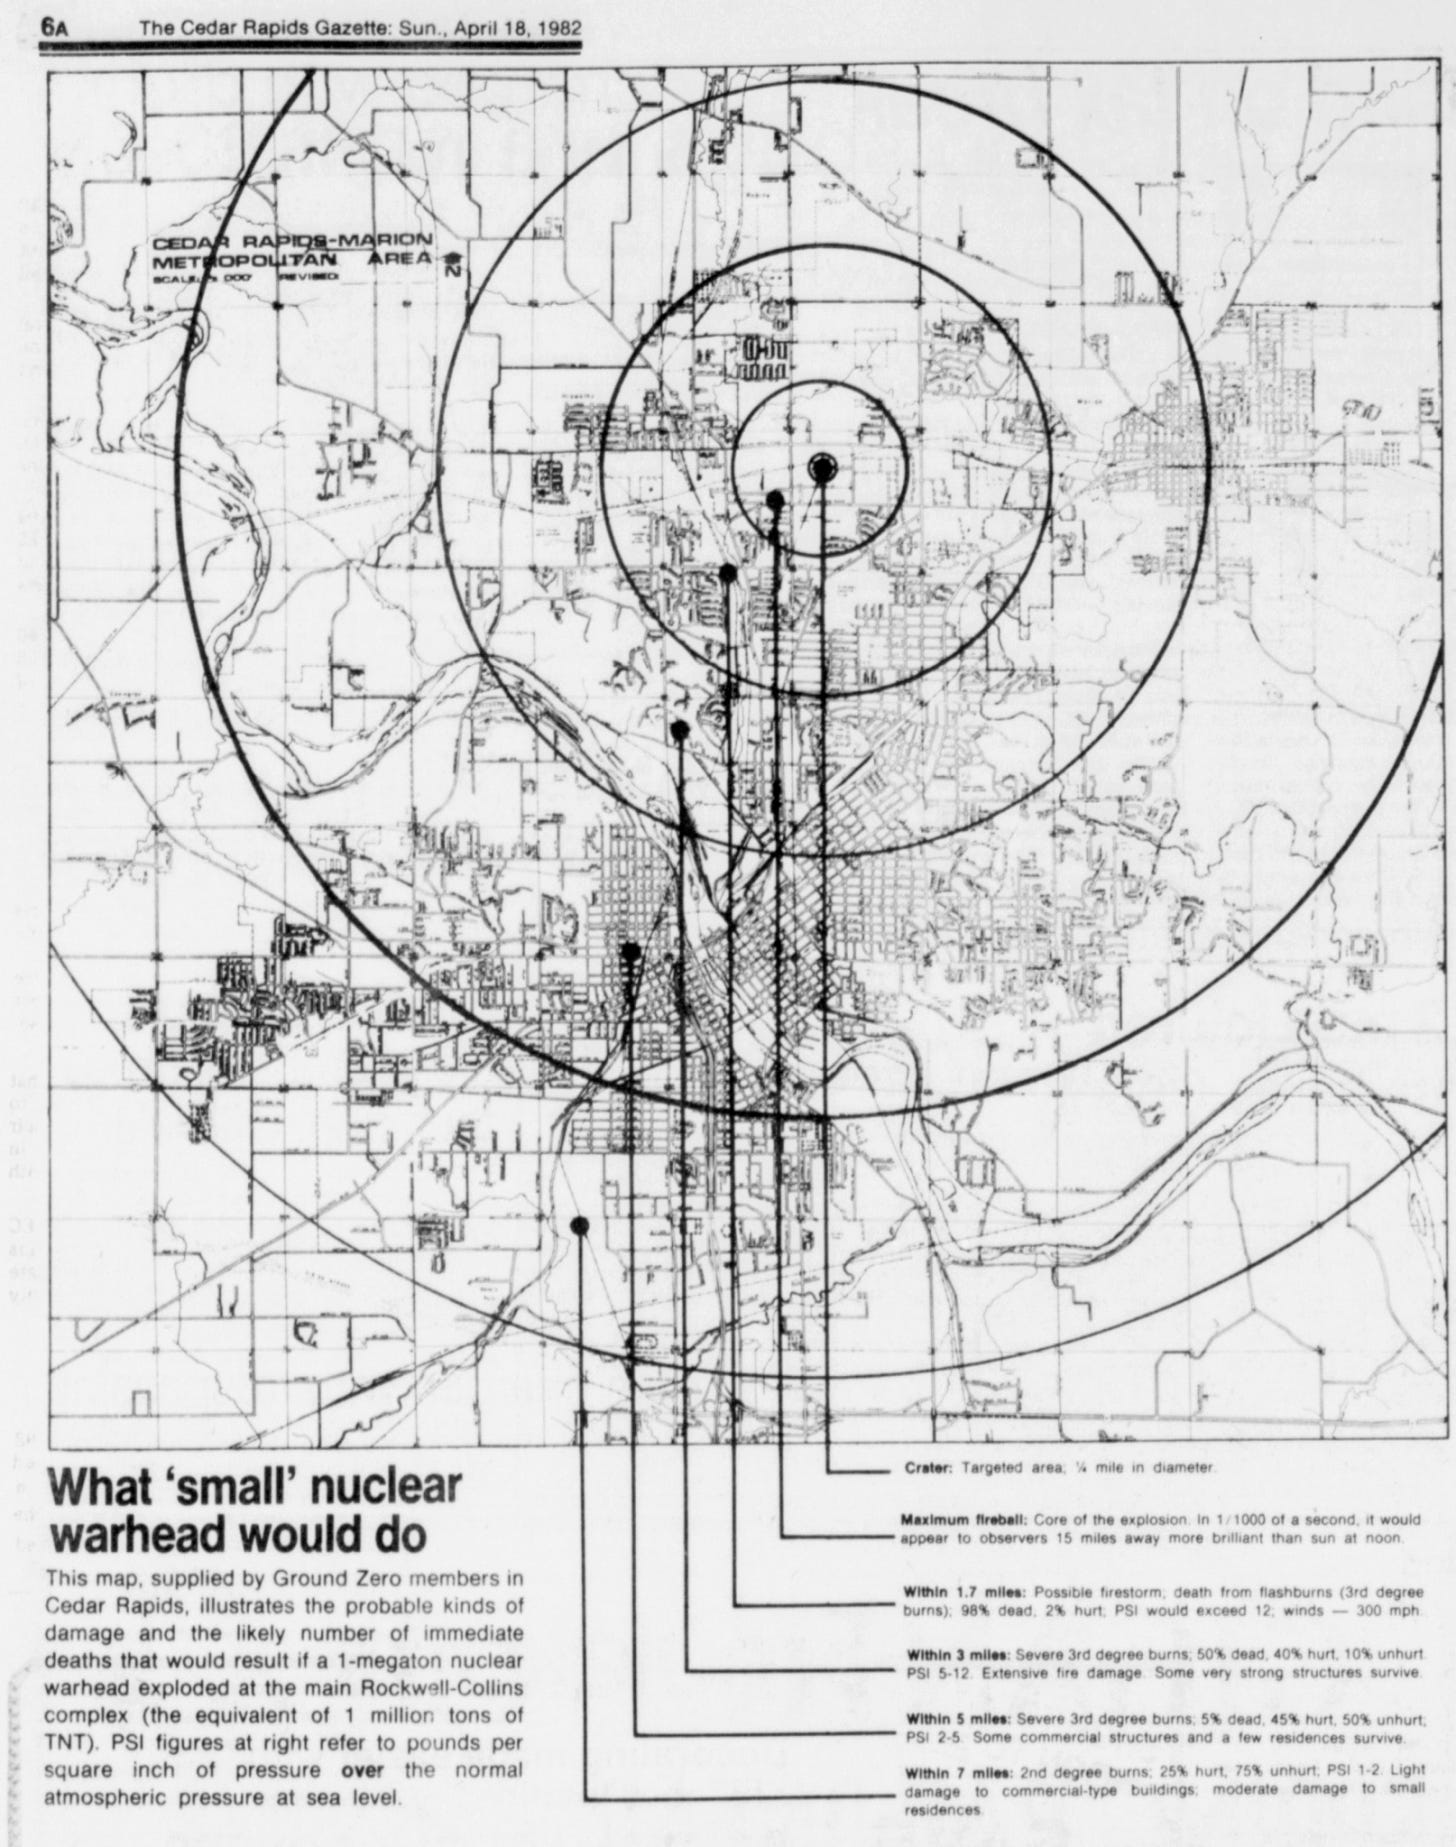 1982 newspaper clipping with a map of Cedar Rapids & a nuclear destruction zone drawn on it in concentric circles from Rockwell Collins